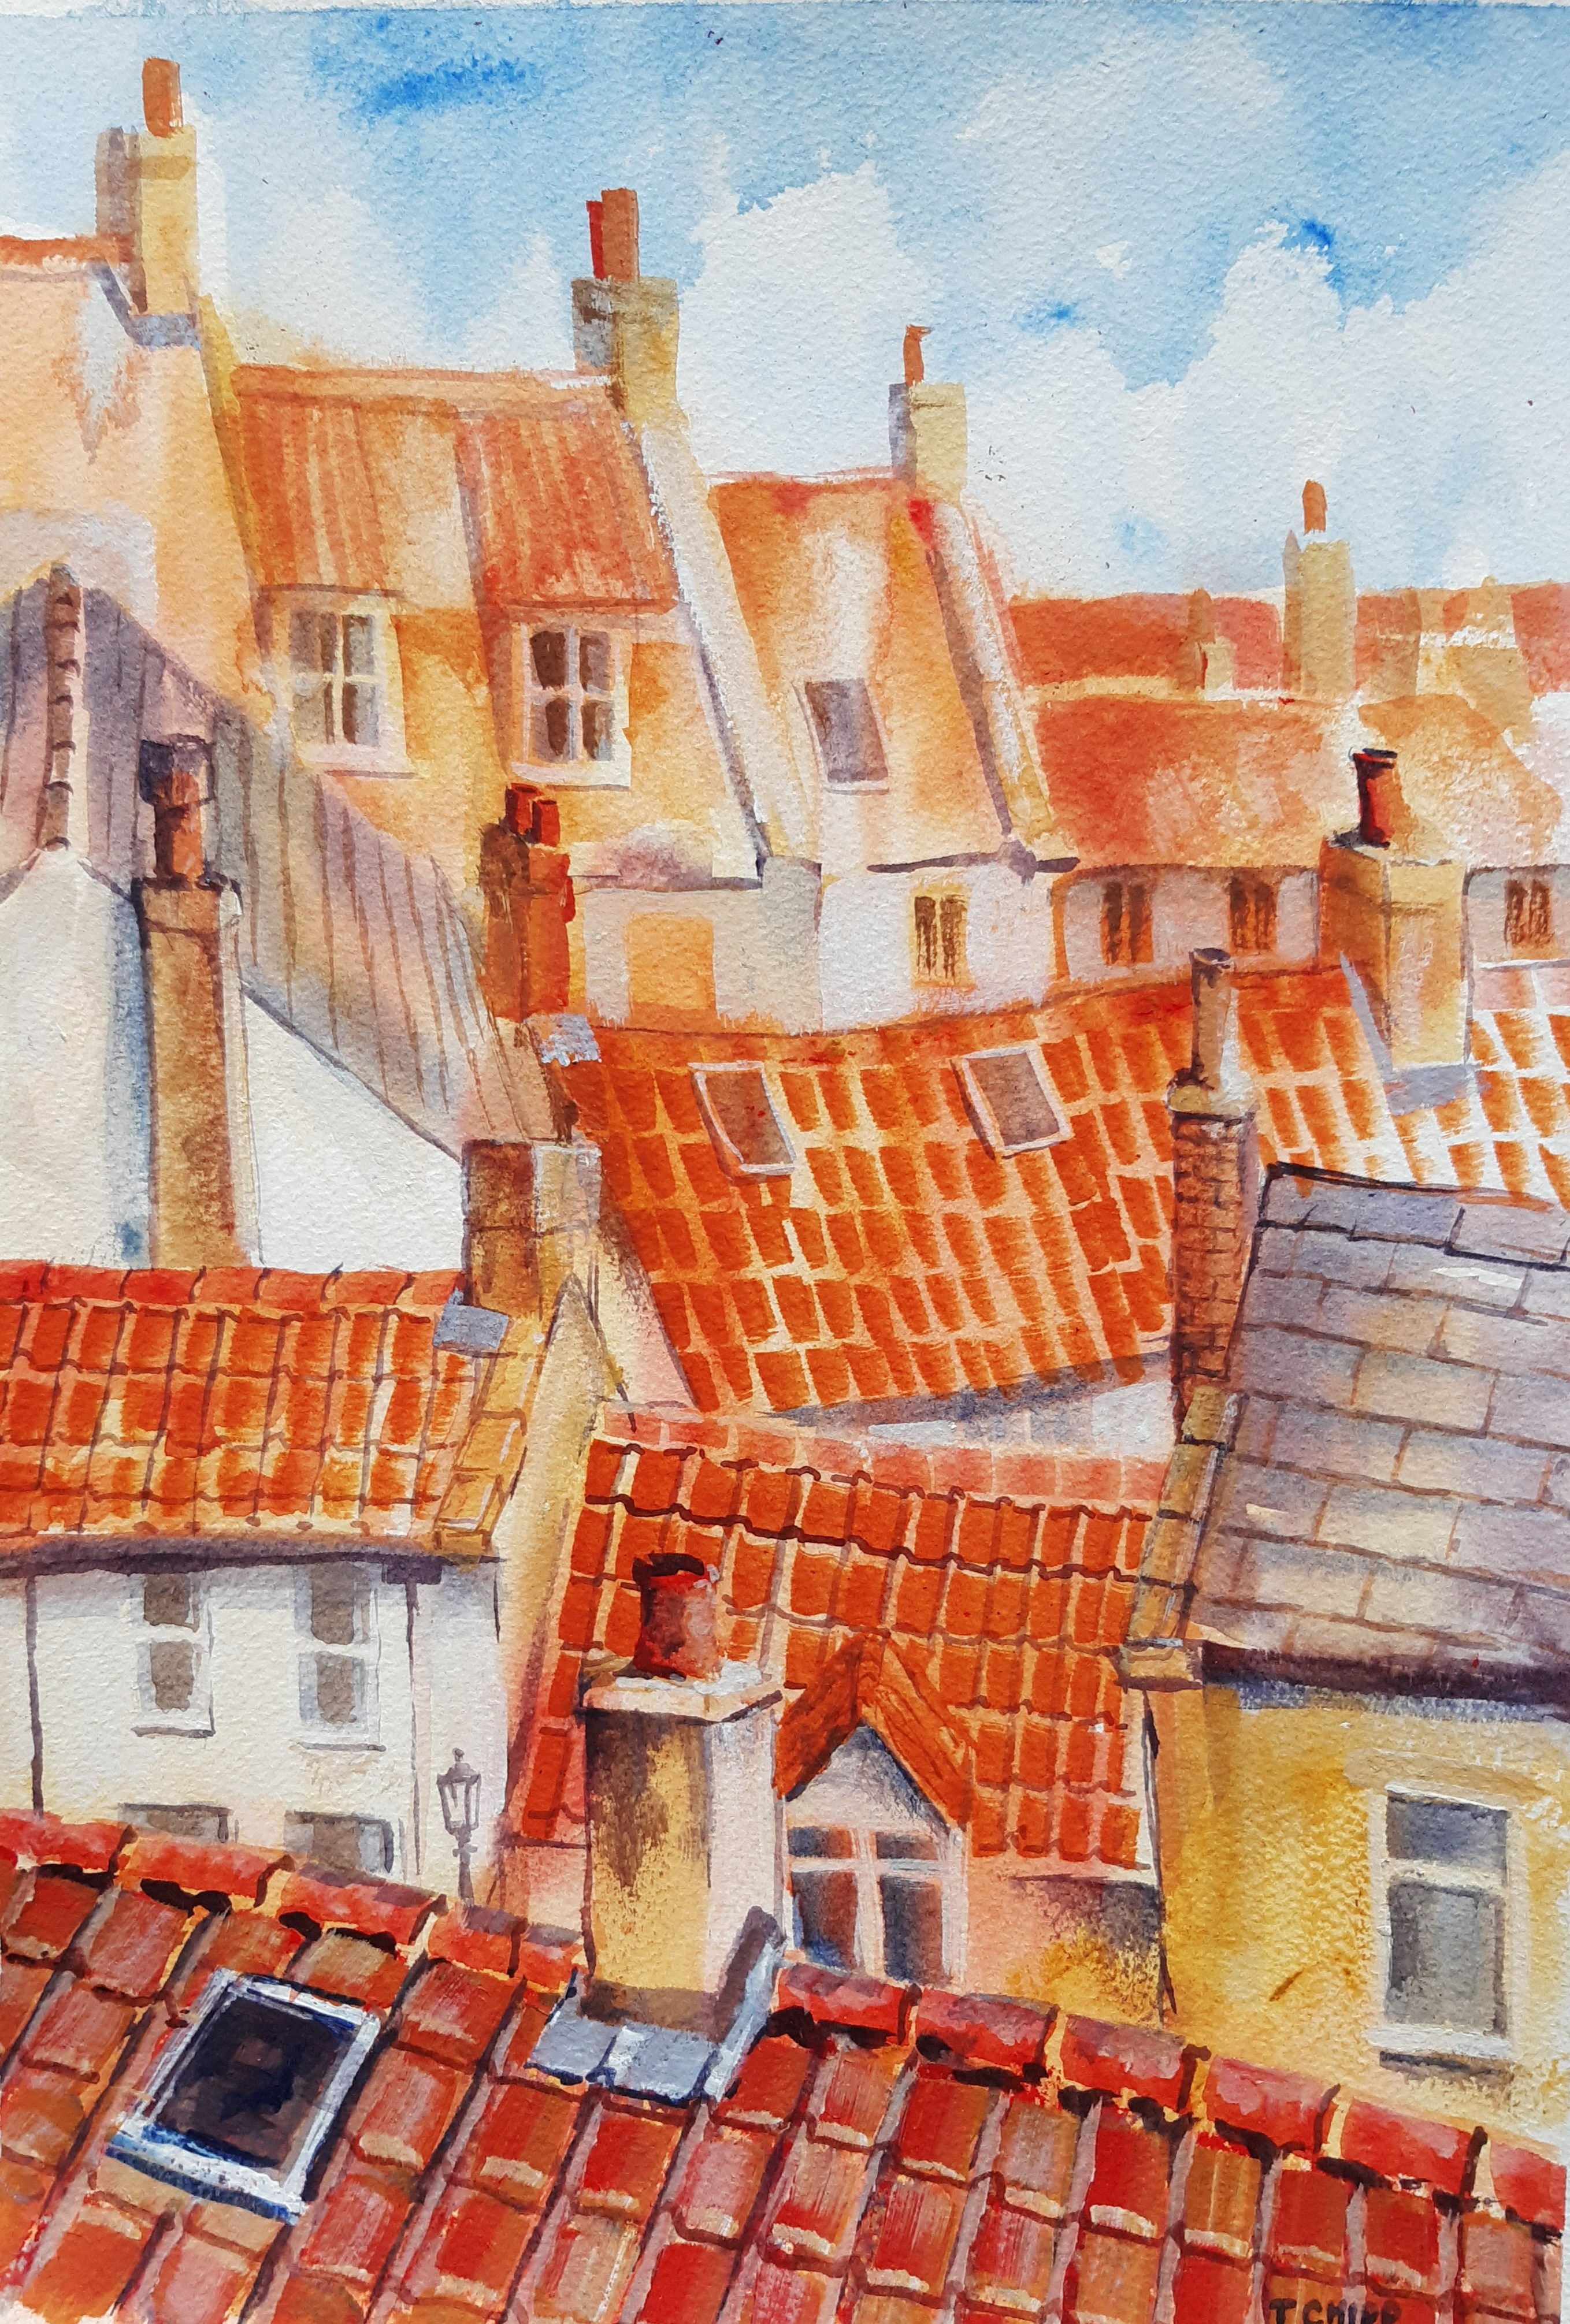 Terry Chipp, "Staithes Rooftops 1", acrylic on paper, 39cm x 27cm, c. 2017. A jumble of rooftops